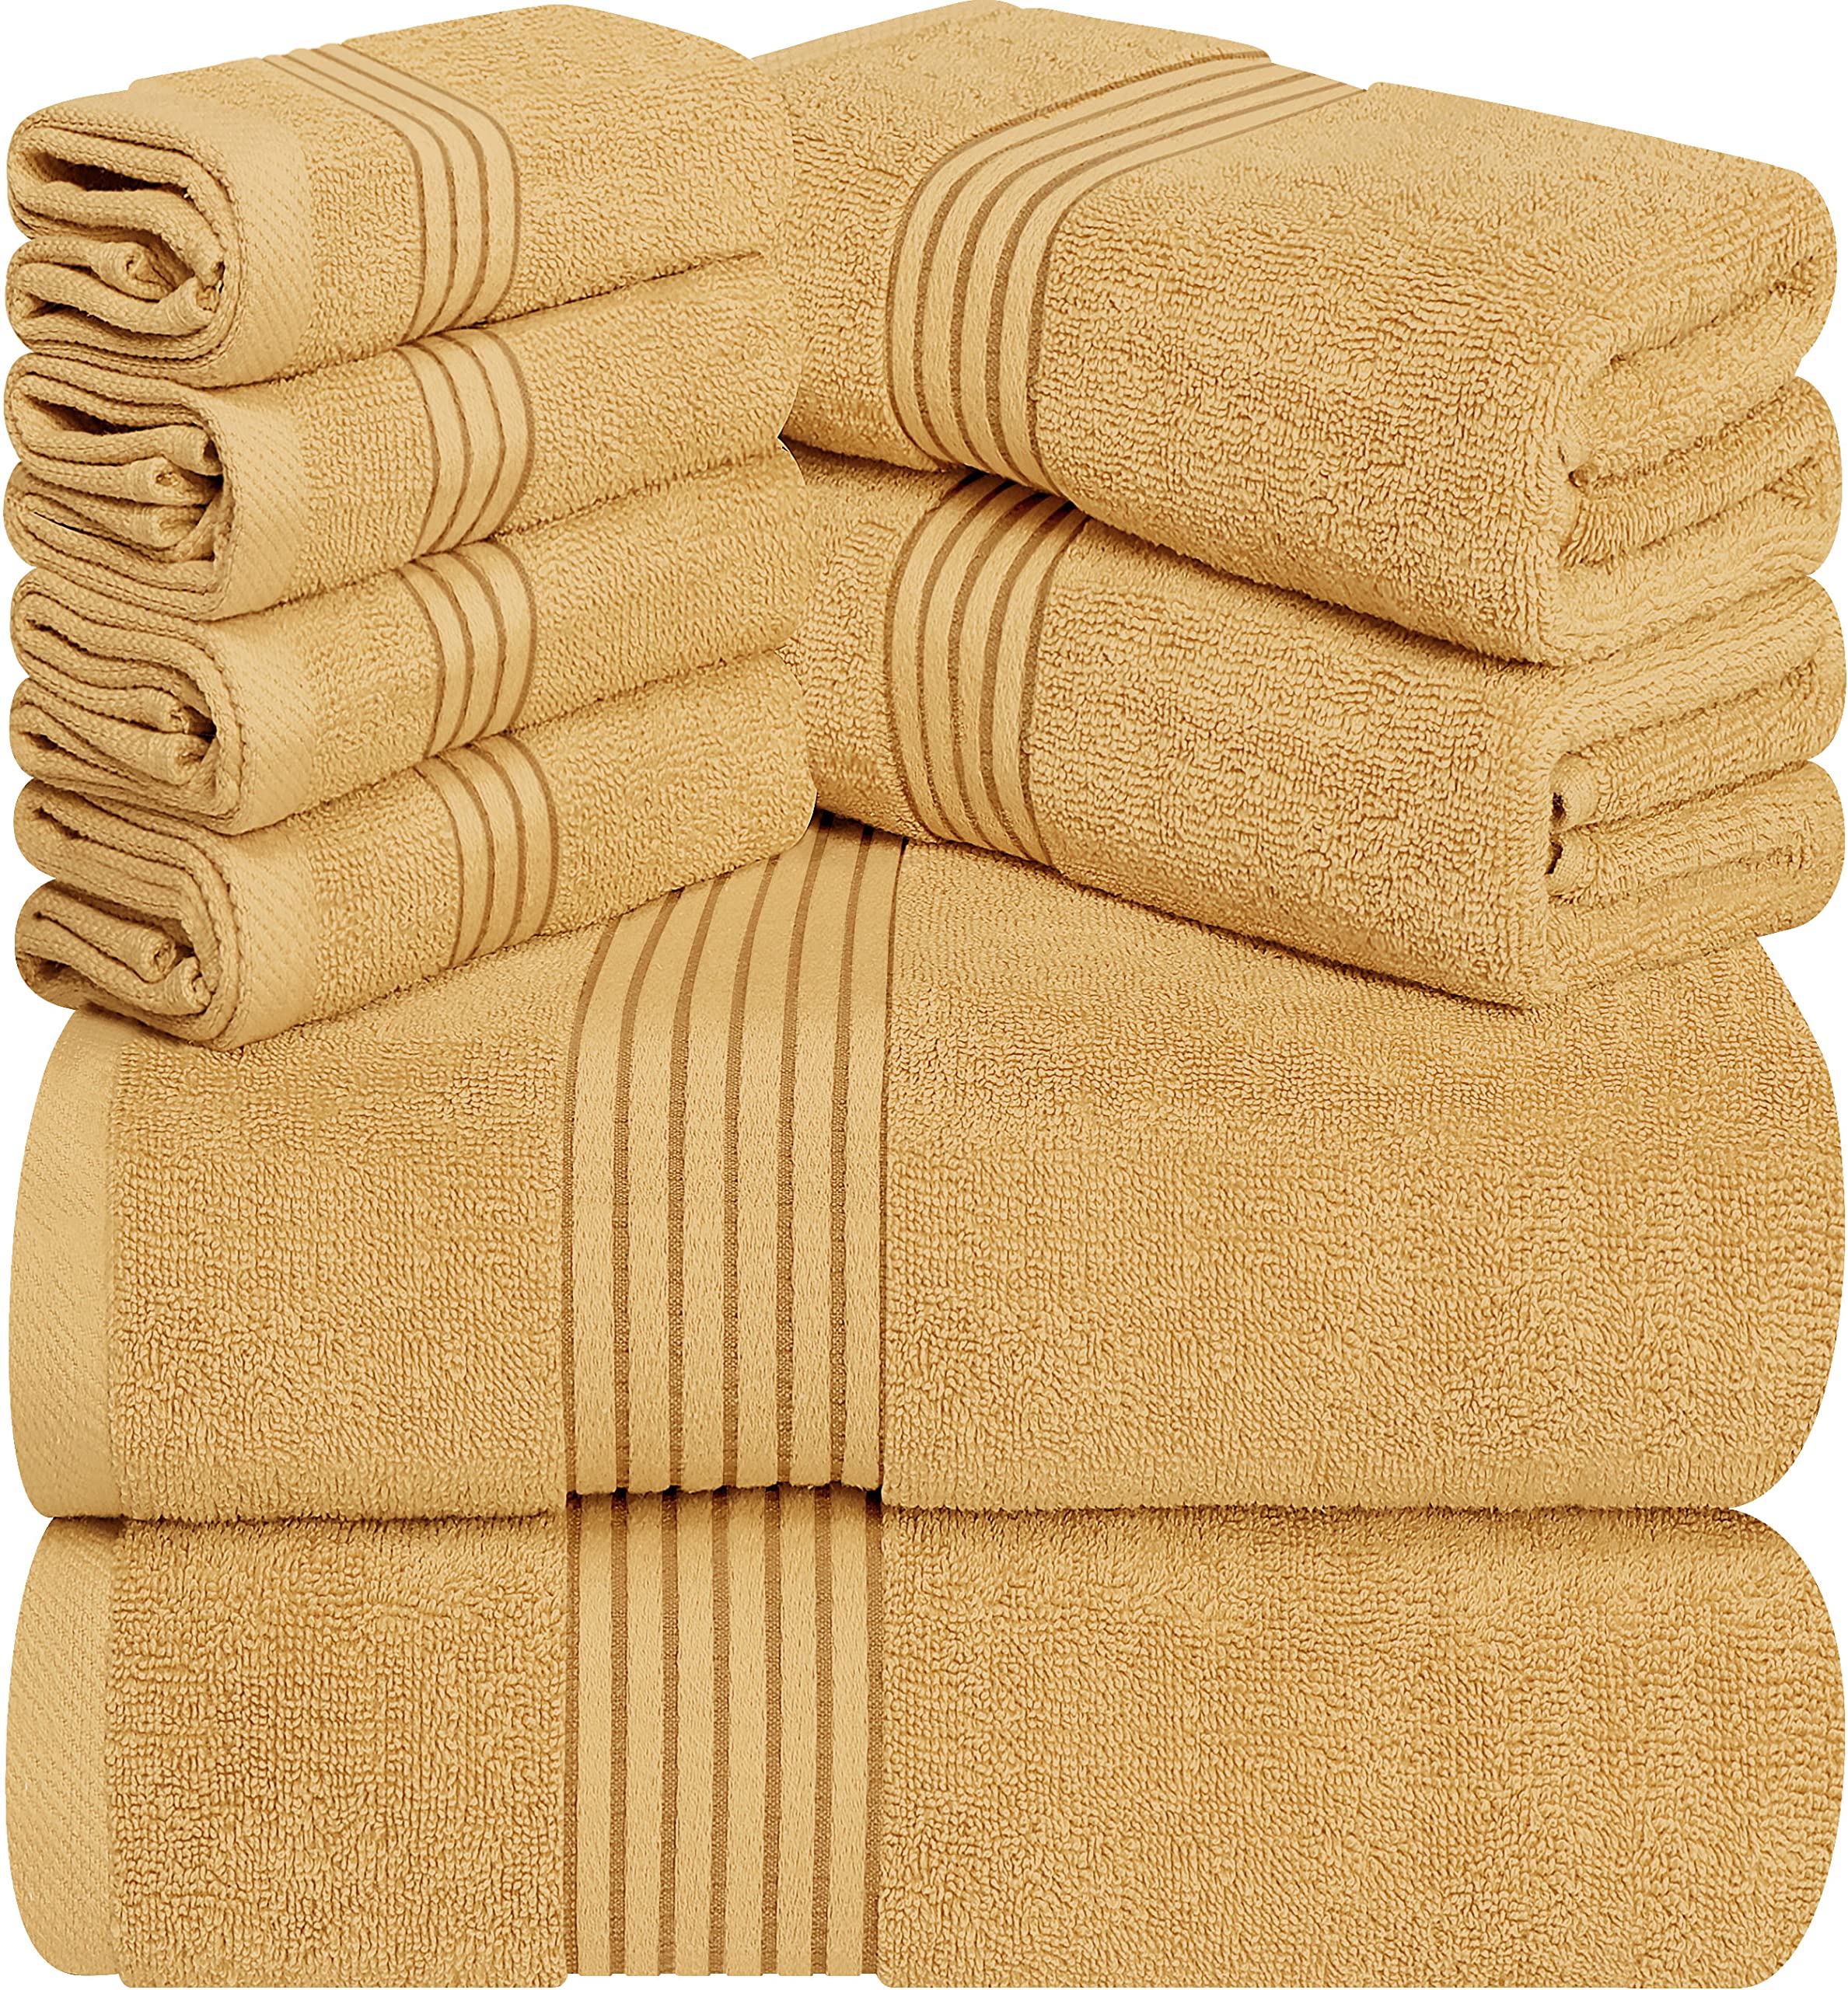 Book Cover Utopia Towels - 600 GSM 8-Piece Premium Towel Set, 2 Bath Towels, 2 Hand Towels and 4 Washcloths -100% Ring Spun Cotton - Machine Washable, Super Soft and Highly Absorbent (Beige)